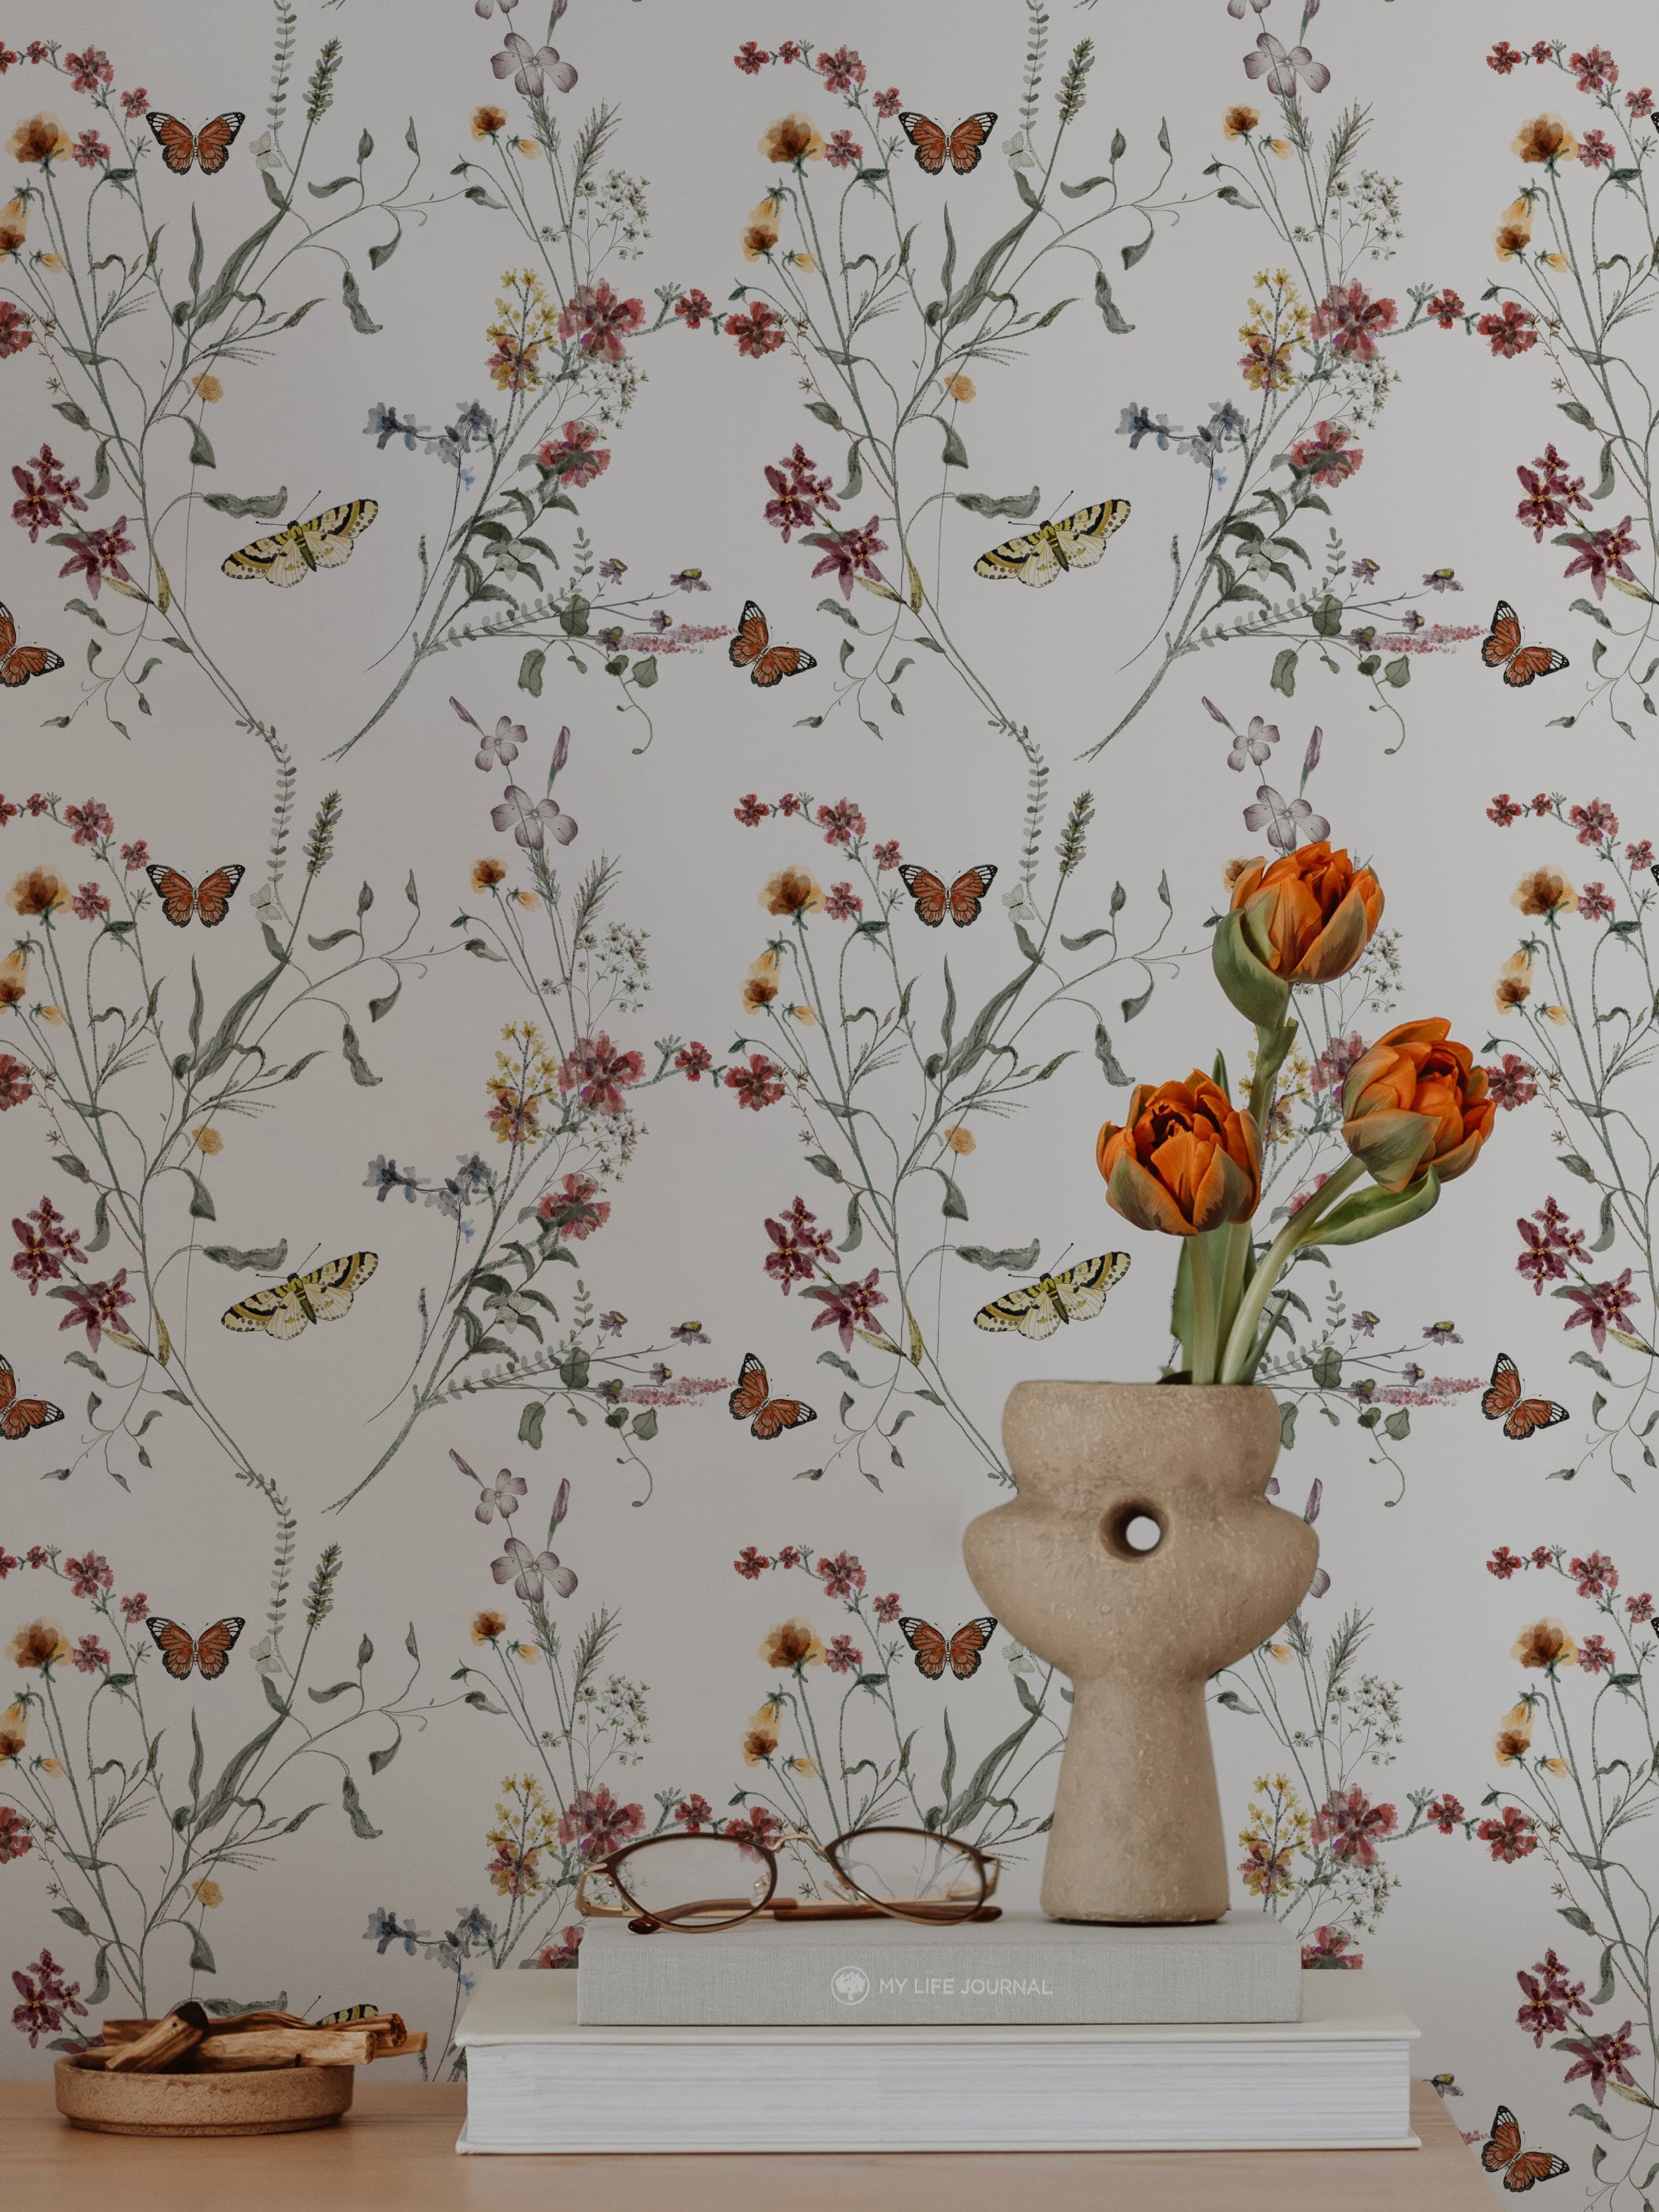 Stylish workspace with Butterfly Botanicals wallpaper. A ceramic vase with orange tulips, glasses, and books on a white table complement the floral theme